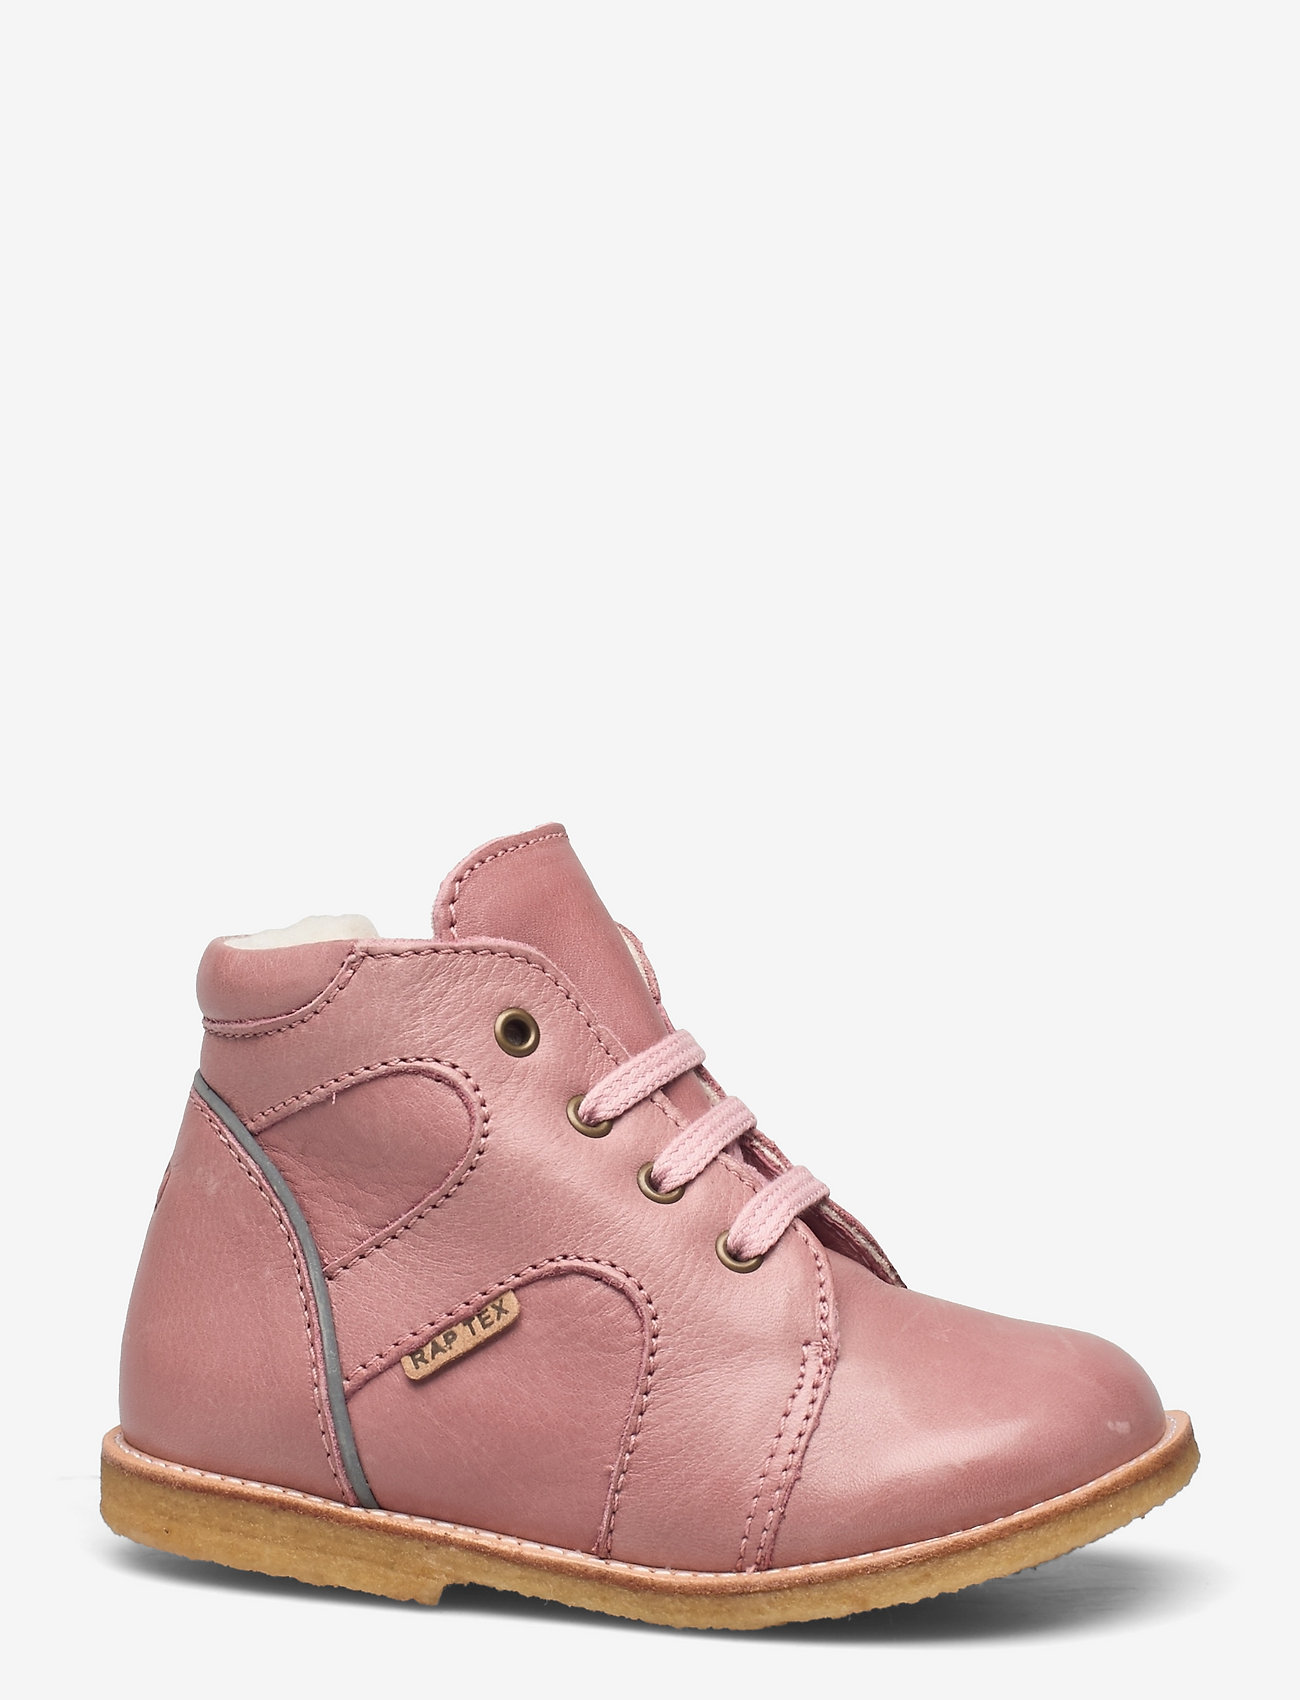 Arauto RAP - HAND MADE LOW BOOT - pink - 1